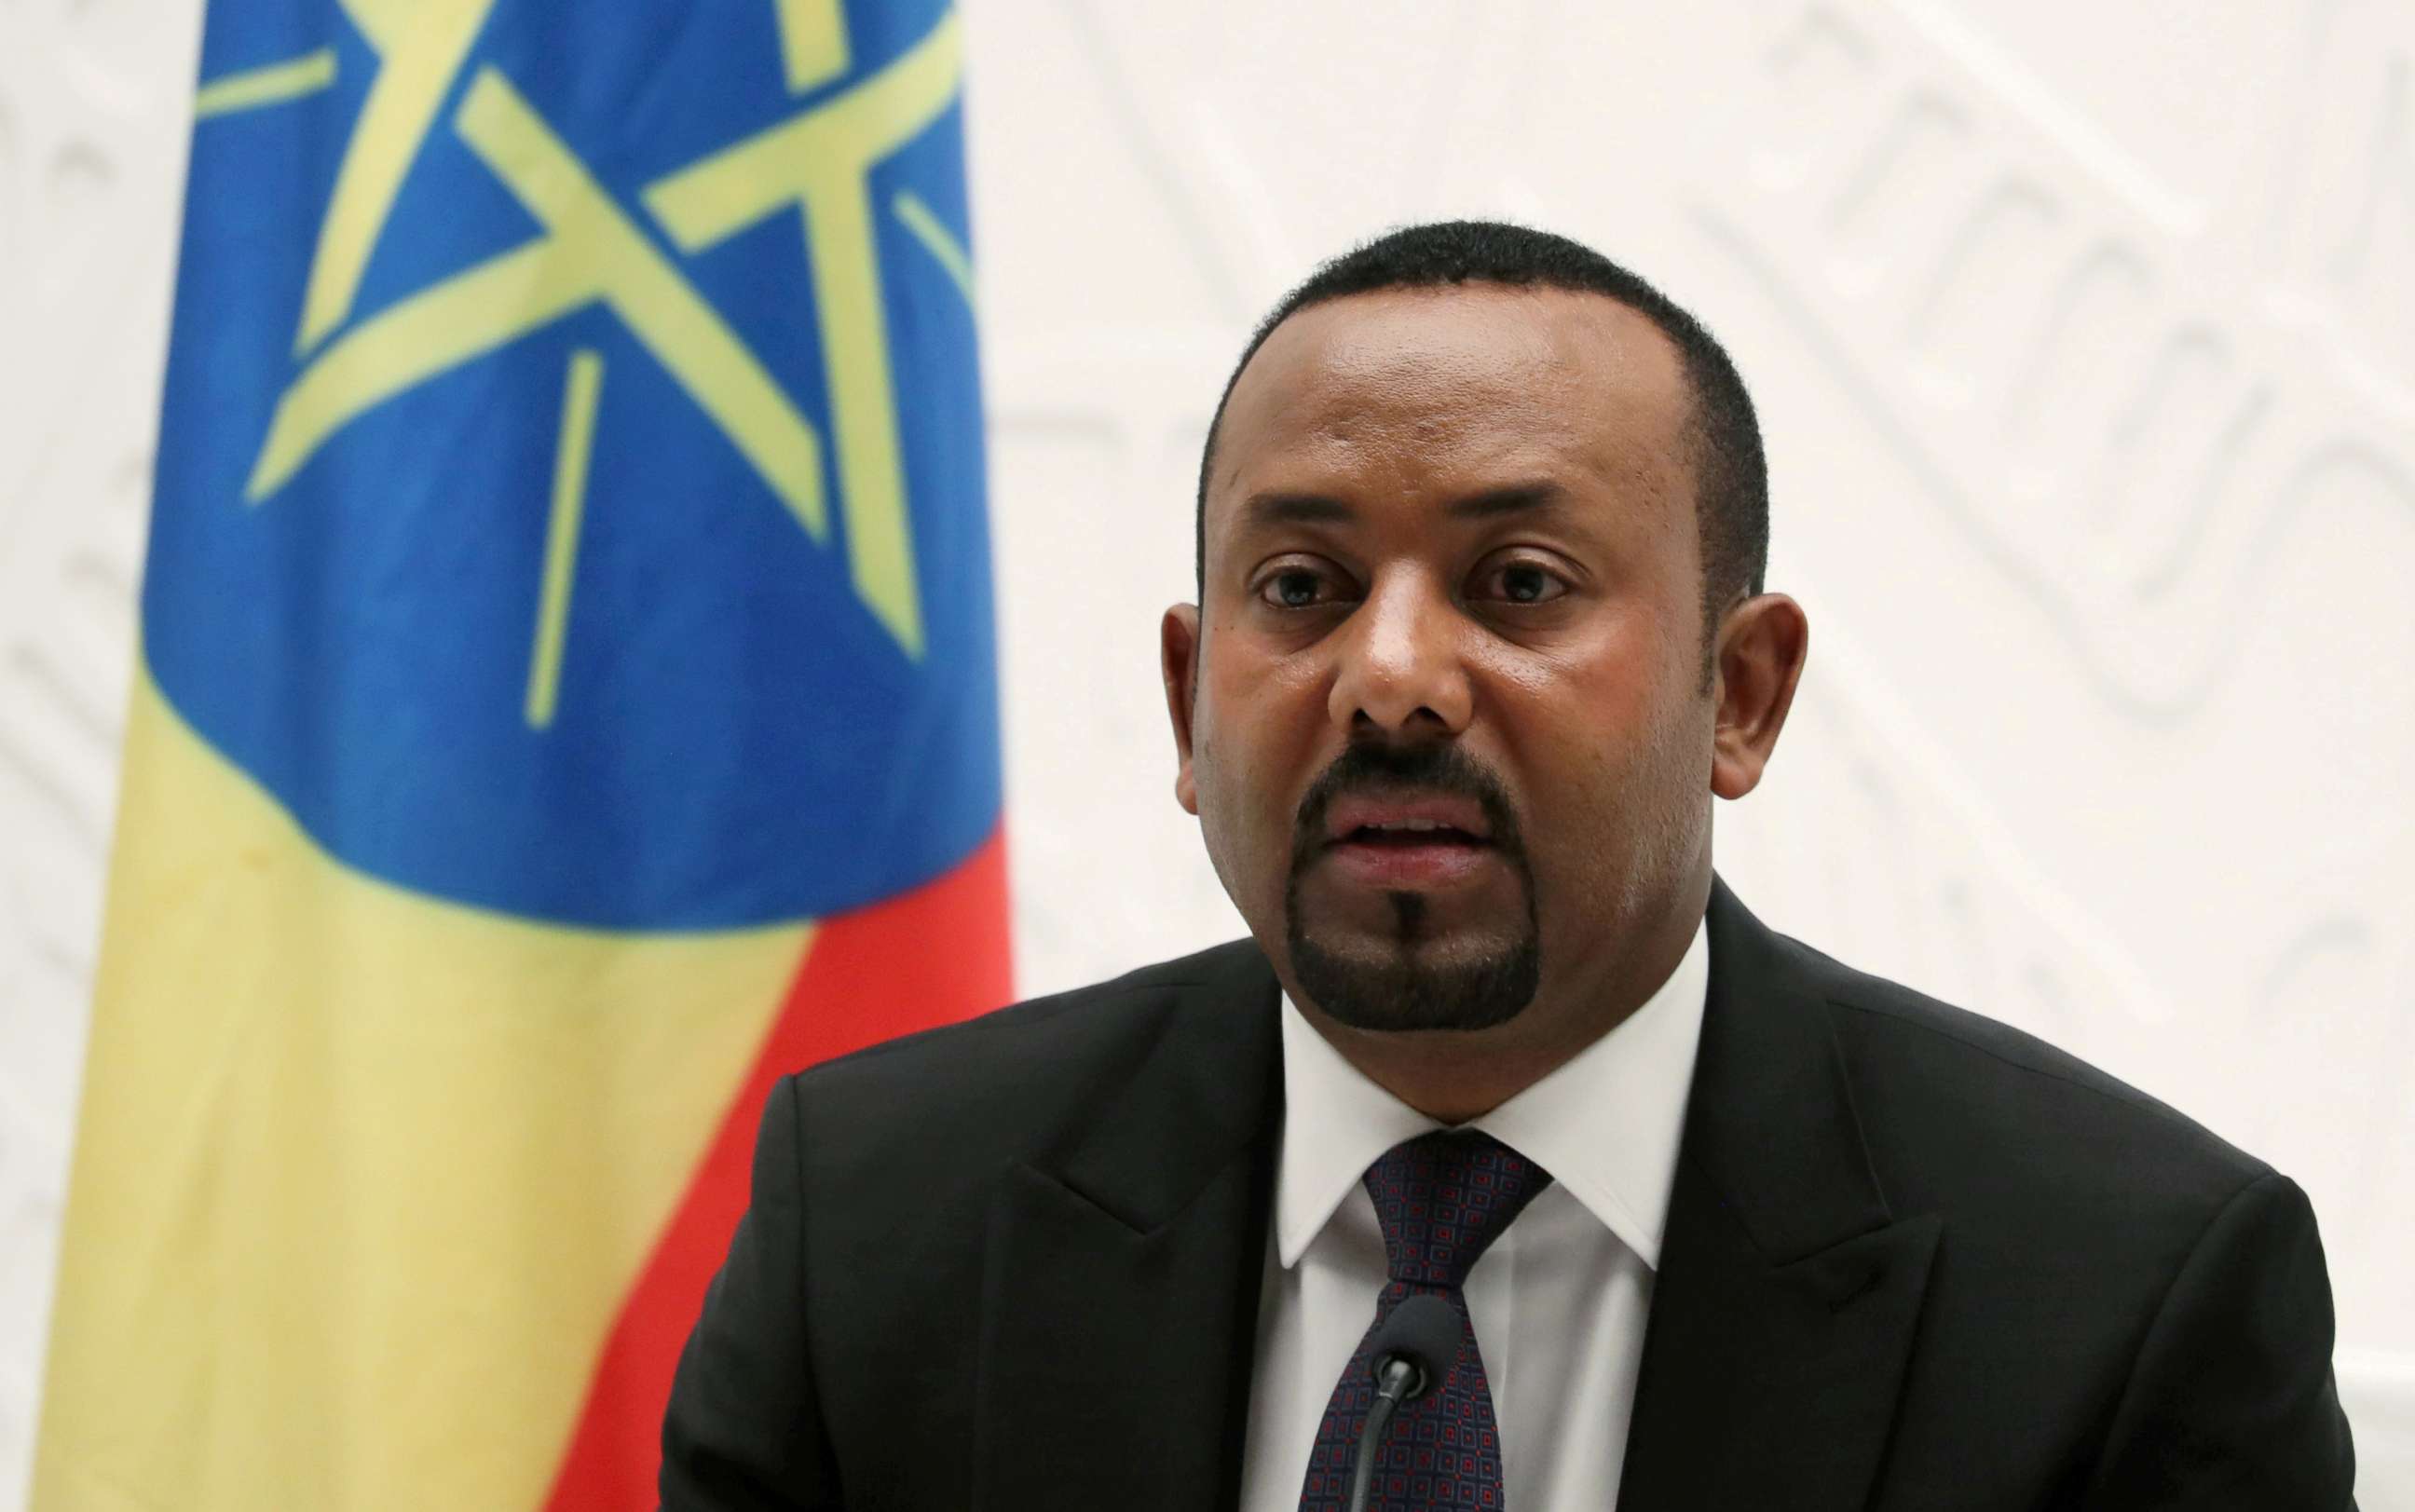 FILE PHOTO: Ethiopian Prime Minister Abiy Ahmed speaks at a news conference at his office in Addis Ababa, Ethiopia, Aug. 1, 2019.